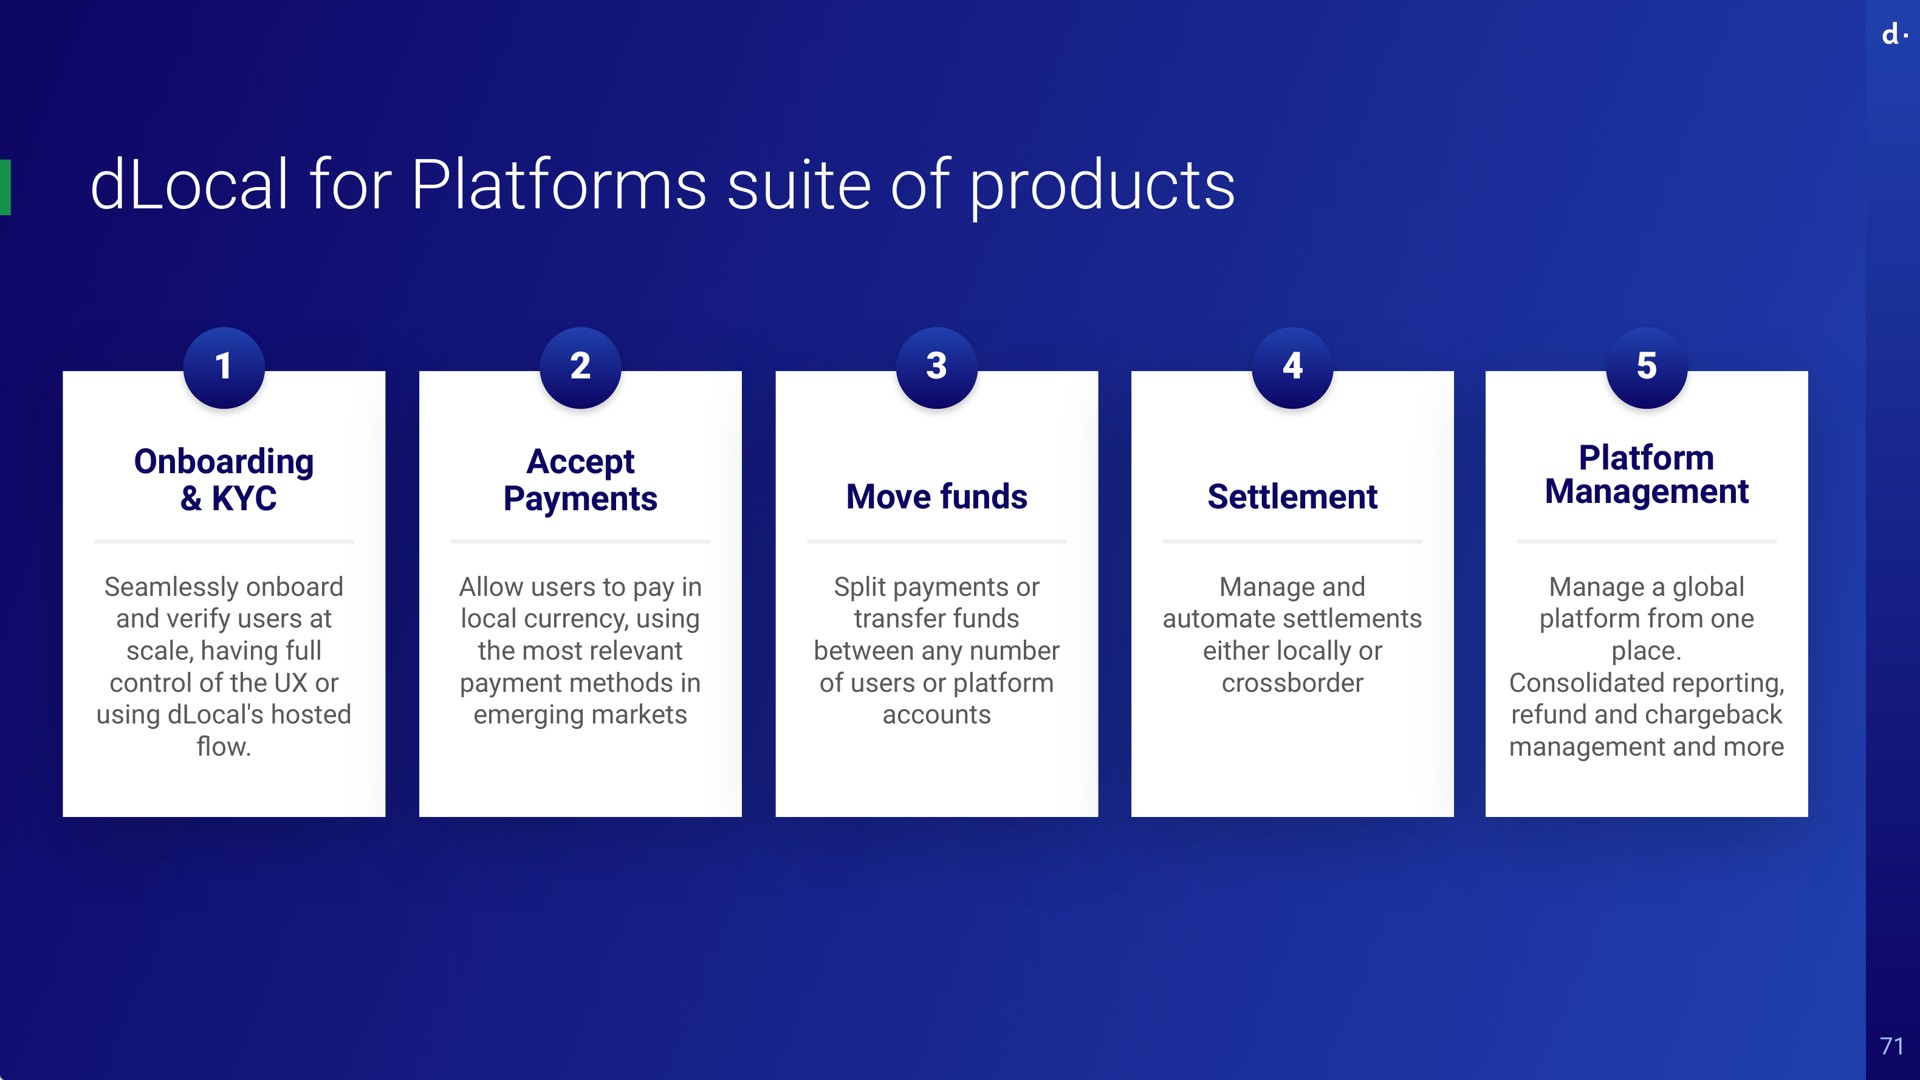 end to end solution for and other platforms to clients process payments manage funds and settle locally or abroad for platforms suite of products accept payments move funds settlement seamlessly and verify users at scale having full control of the or using hosted allow users to pay in local currency using the most relevant payment methods in emerging markets split payments or transfer funds between any number of users or platform accounts manage and settlements either locally or platform management manage a global platform from one place consolidated reporting refund and management and more flow | dLocal